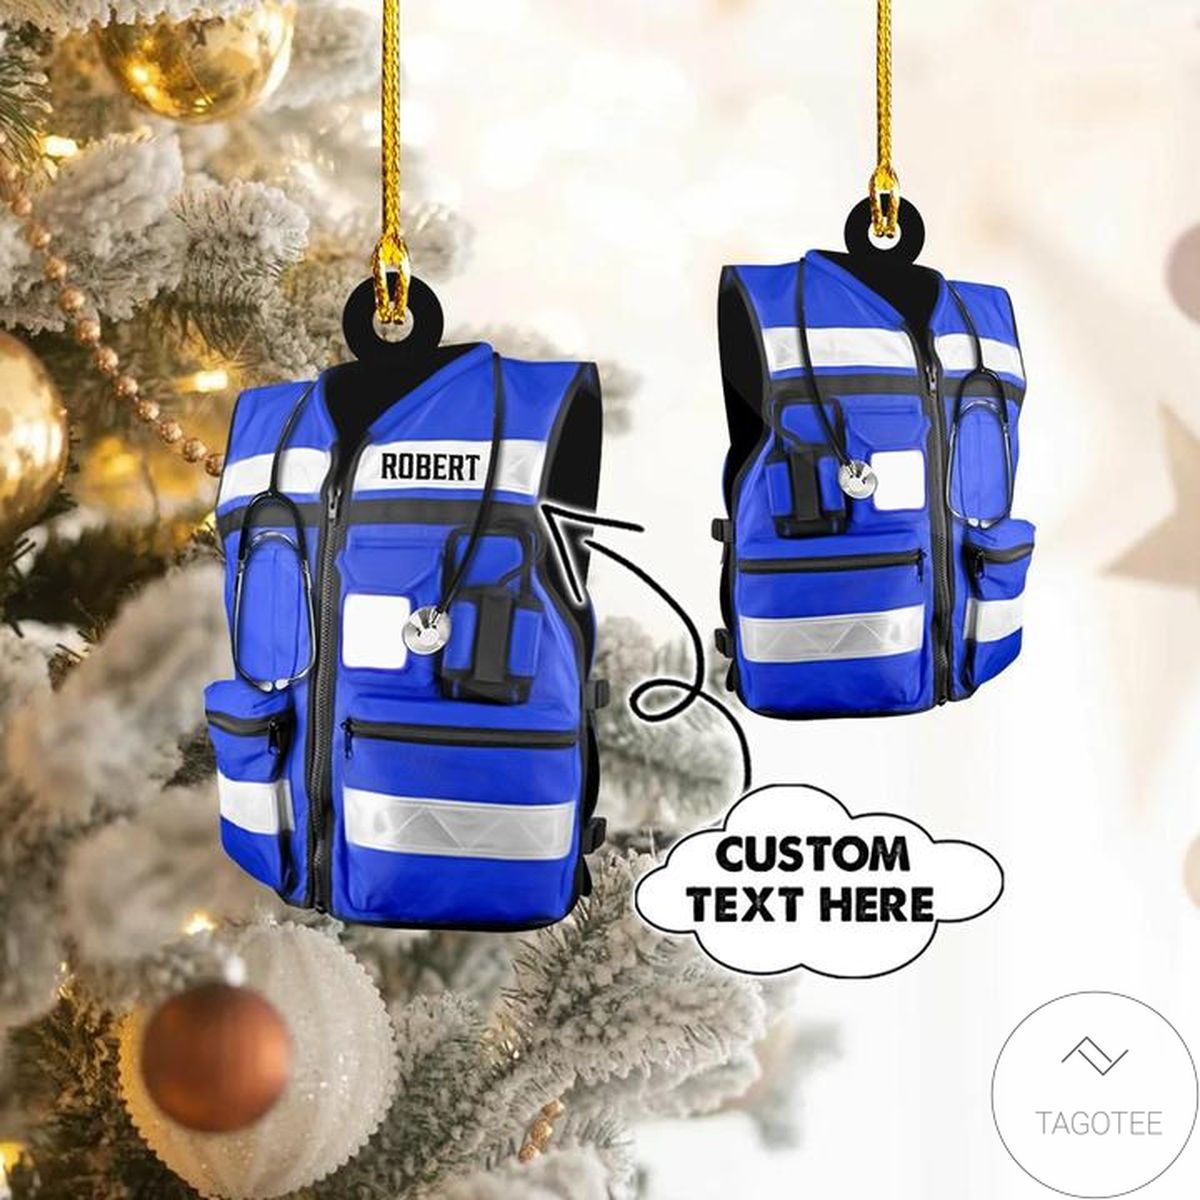 Personalized Ems Emt Paramedic Shaped Ornament